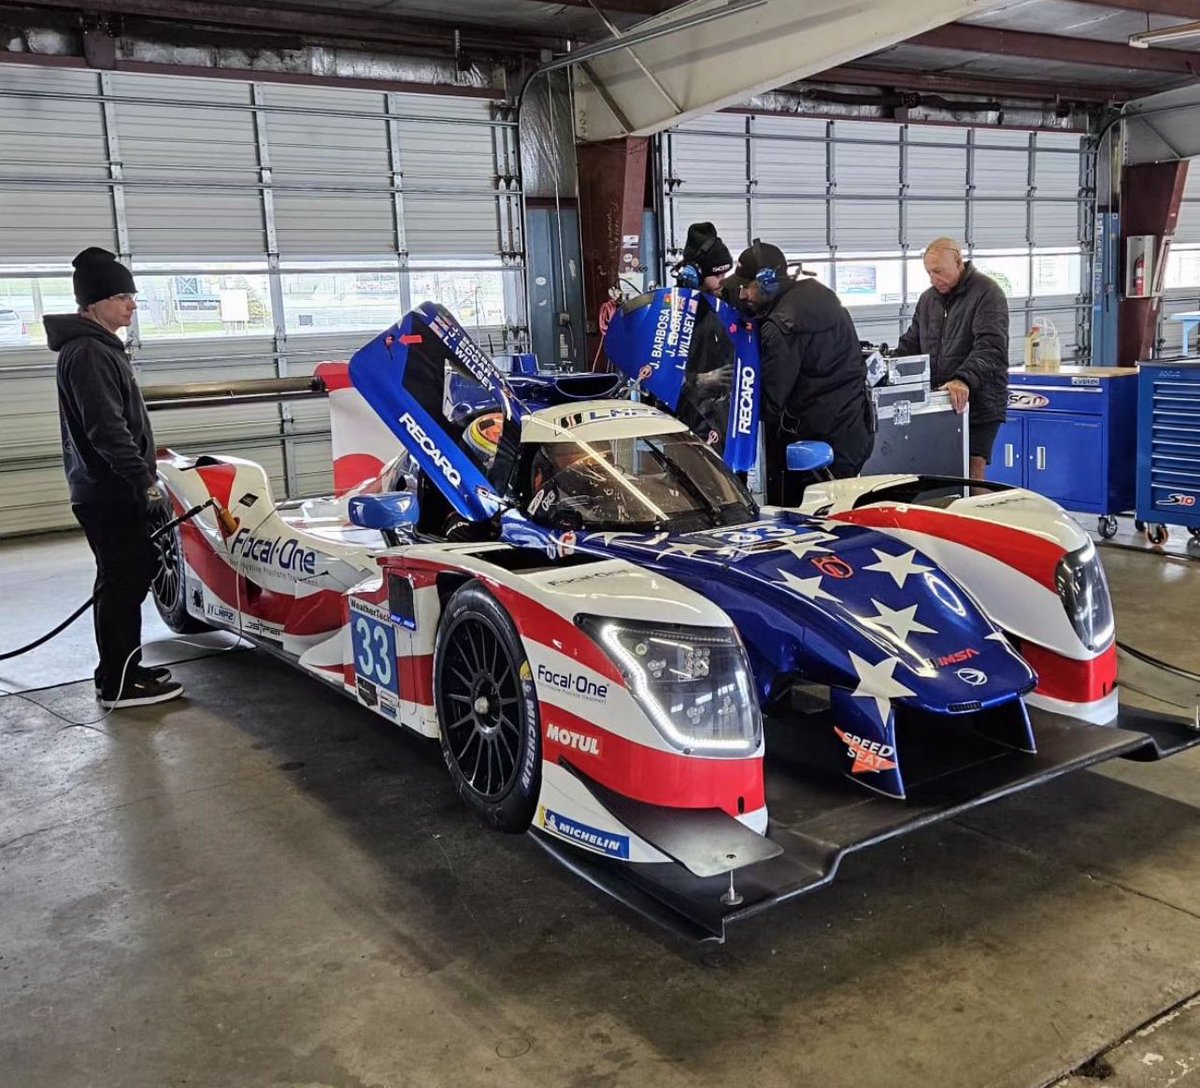 Testing 1,2! ⏱️🔧 Really enjoyed being back with the @SeanCreechMS team for a couple of days testing at @WGI. It was bit cold, but what a circuit! 🙌🏼

#IMSA #EnduranceRacing #Testing @MtrsportAcademy #TeamUK